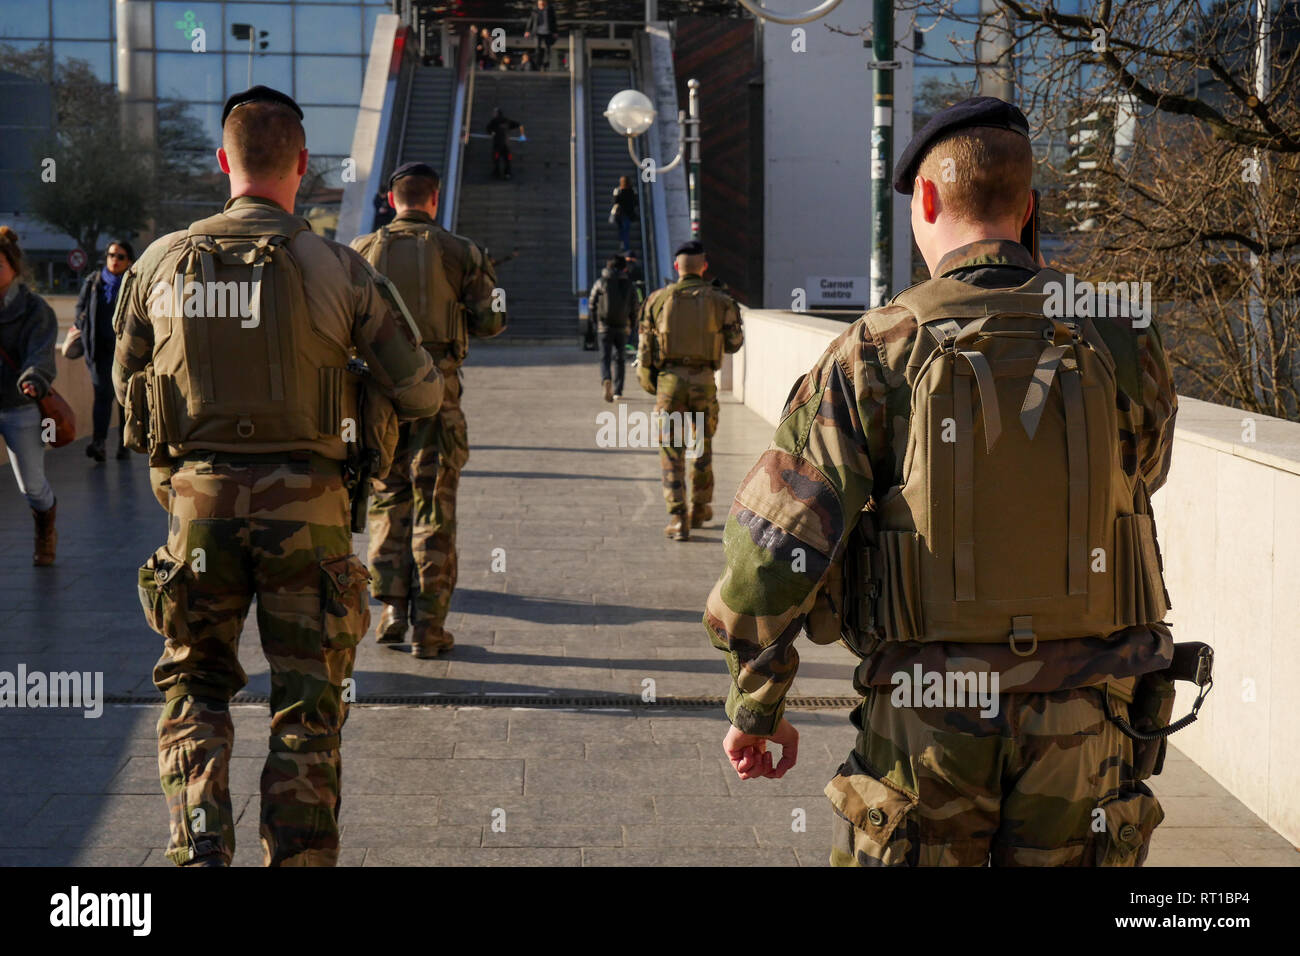 Lyon, France, February 27th 2019: French soldiers are seen in Lyon (Central-Eastern France) on February 29, 2019 as they patrol the city center as part of Sentinelle Operation, the military side of Vigipirate anti-terror governmental disposal. Credit Photo: Serge Mouraret/Alamy Live News Stock Photo